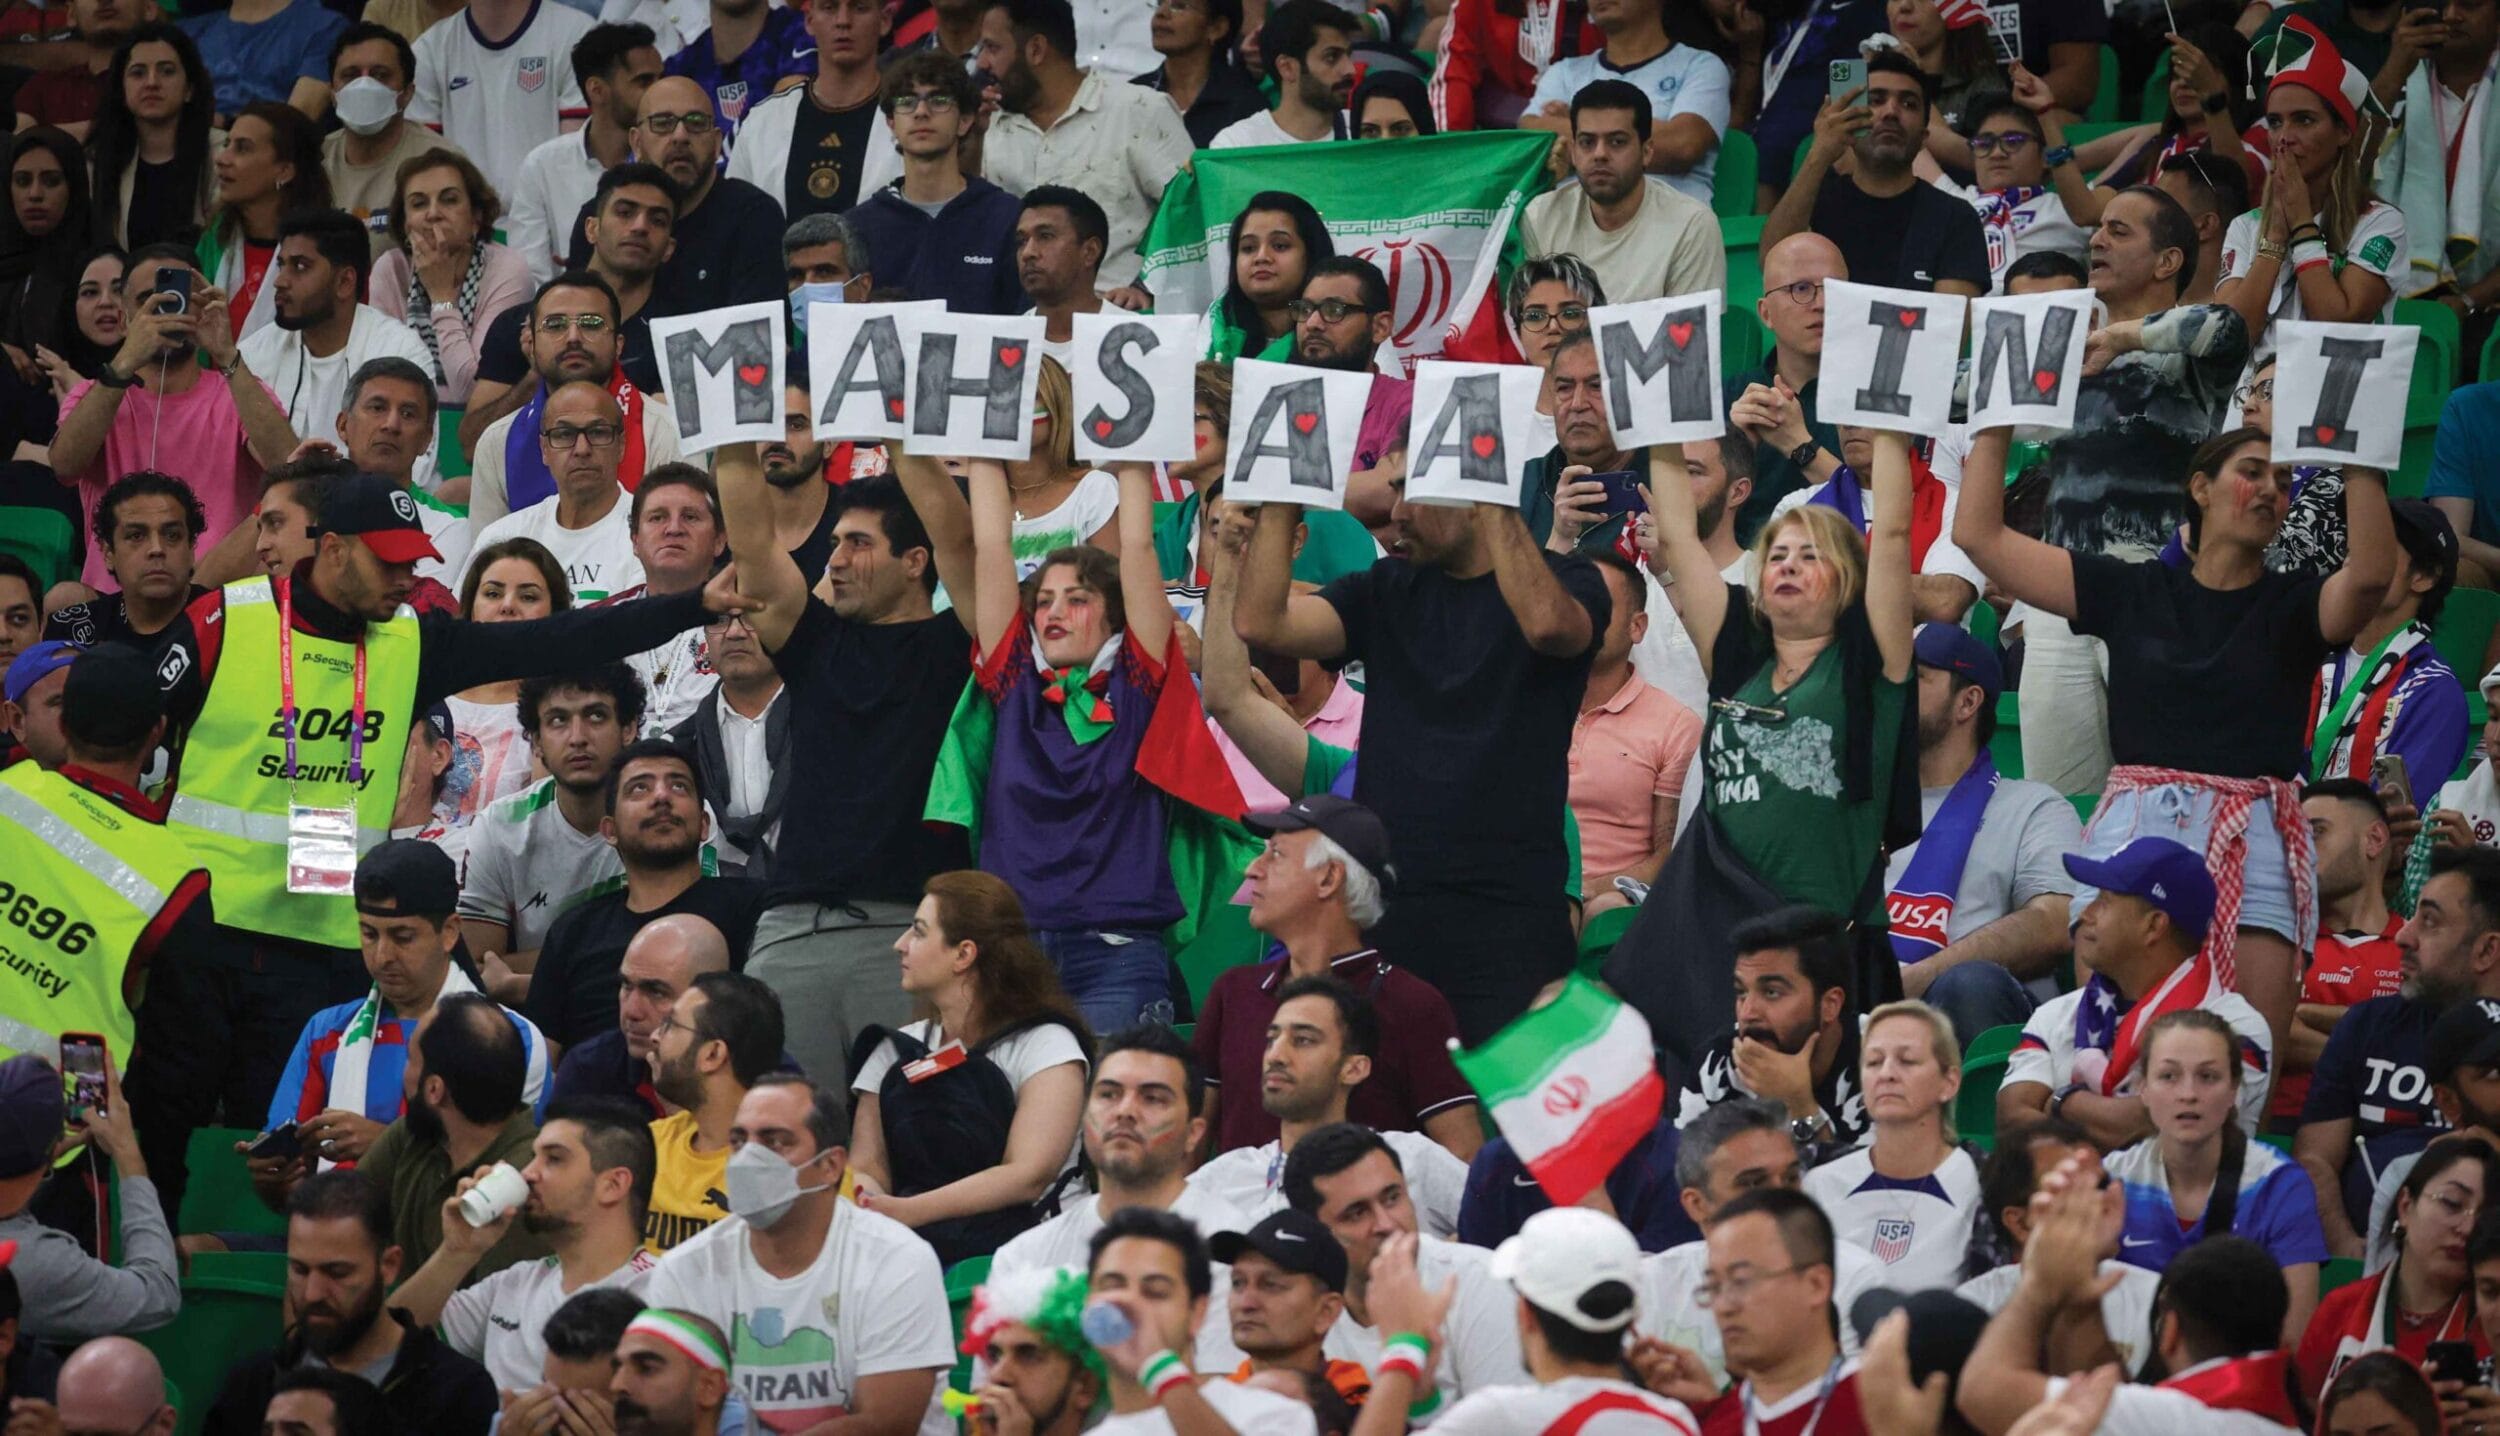 Security guards approach supporters, including Arman Jabbari, holding letters forming the name Mahsa Amini at the Iran vs US game, 29th November 2022 